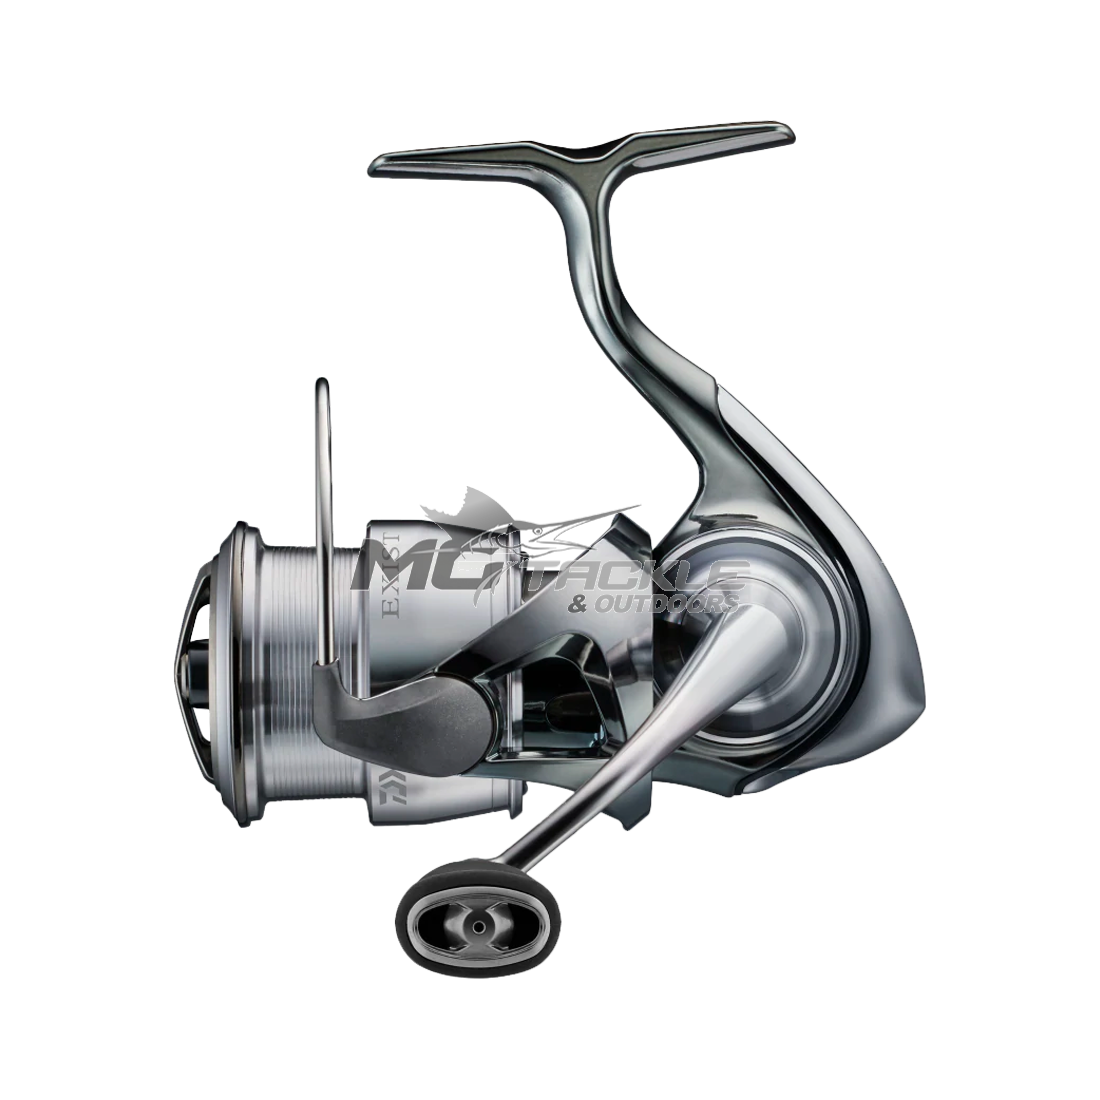 Daiwa 22 Exist Spin Reel | MoTackle & Outdoors